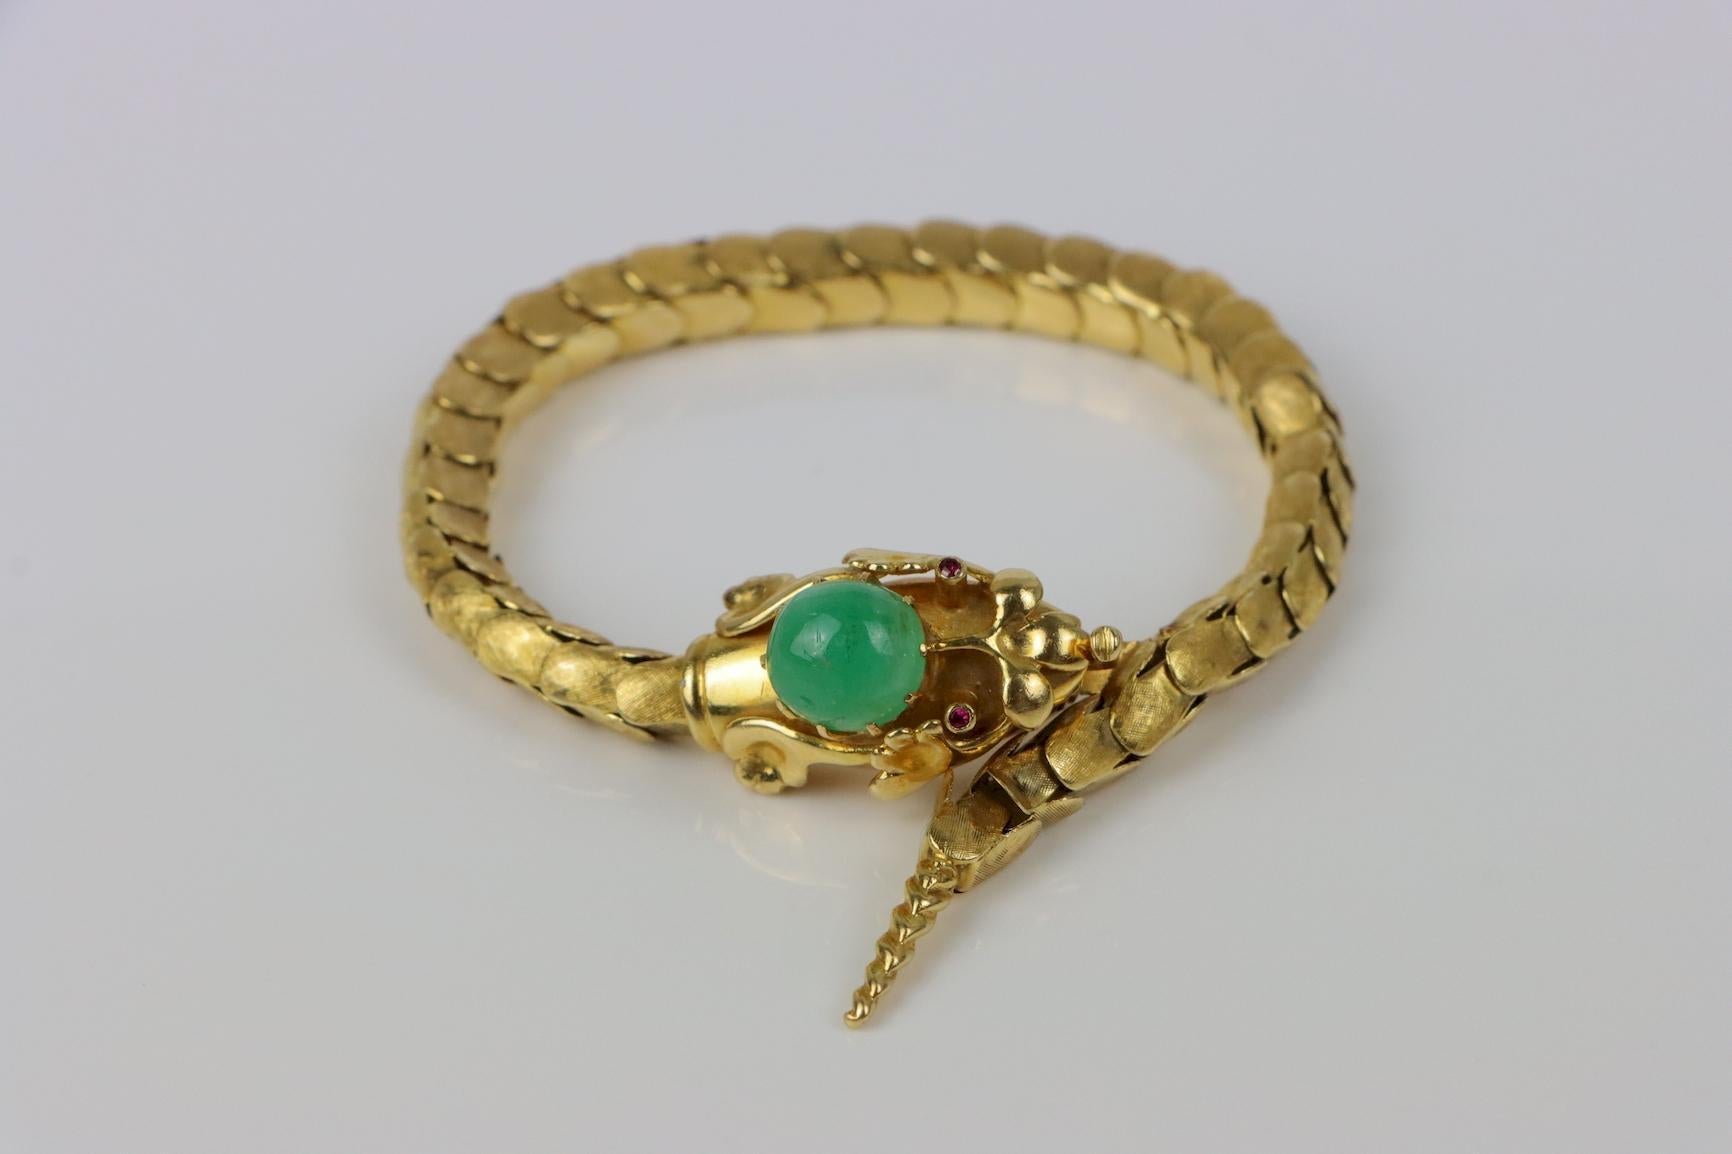 Vintage 18K Gold Reticulated Snake Bracelet 
Circa 1980s
Solid & hand-worked 18K Gold mounted with a high-domed Mottled Green Cabochon and Red cabochon eyes.
Unstamped 

Approximate Dimensions:
22.2 cm (Length) 
0.6 cm (Bracelet Link Width) 
15.875